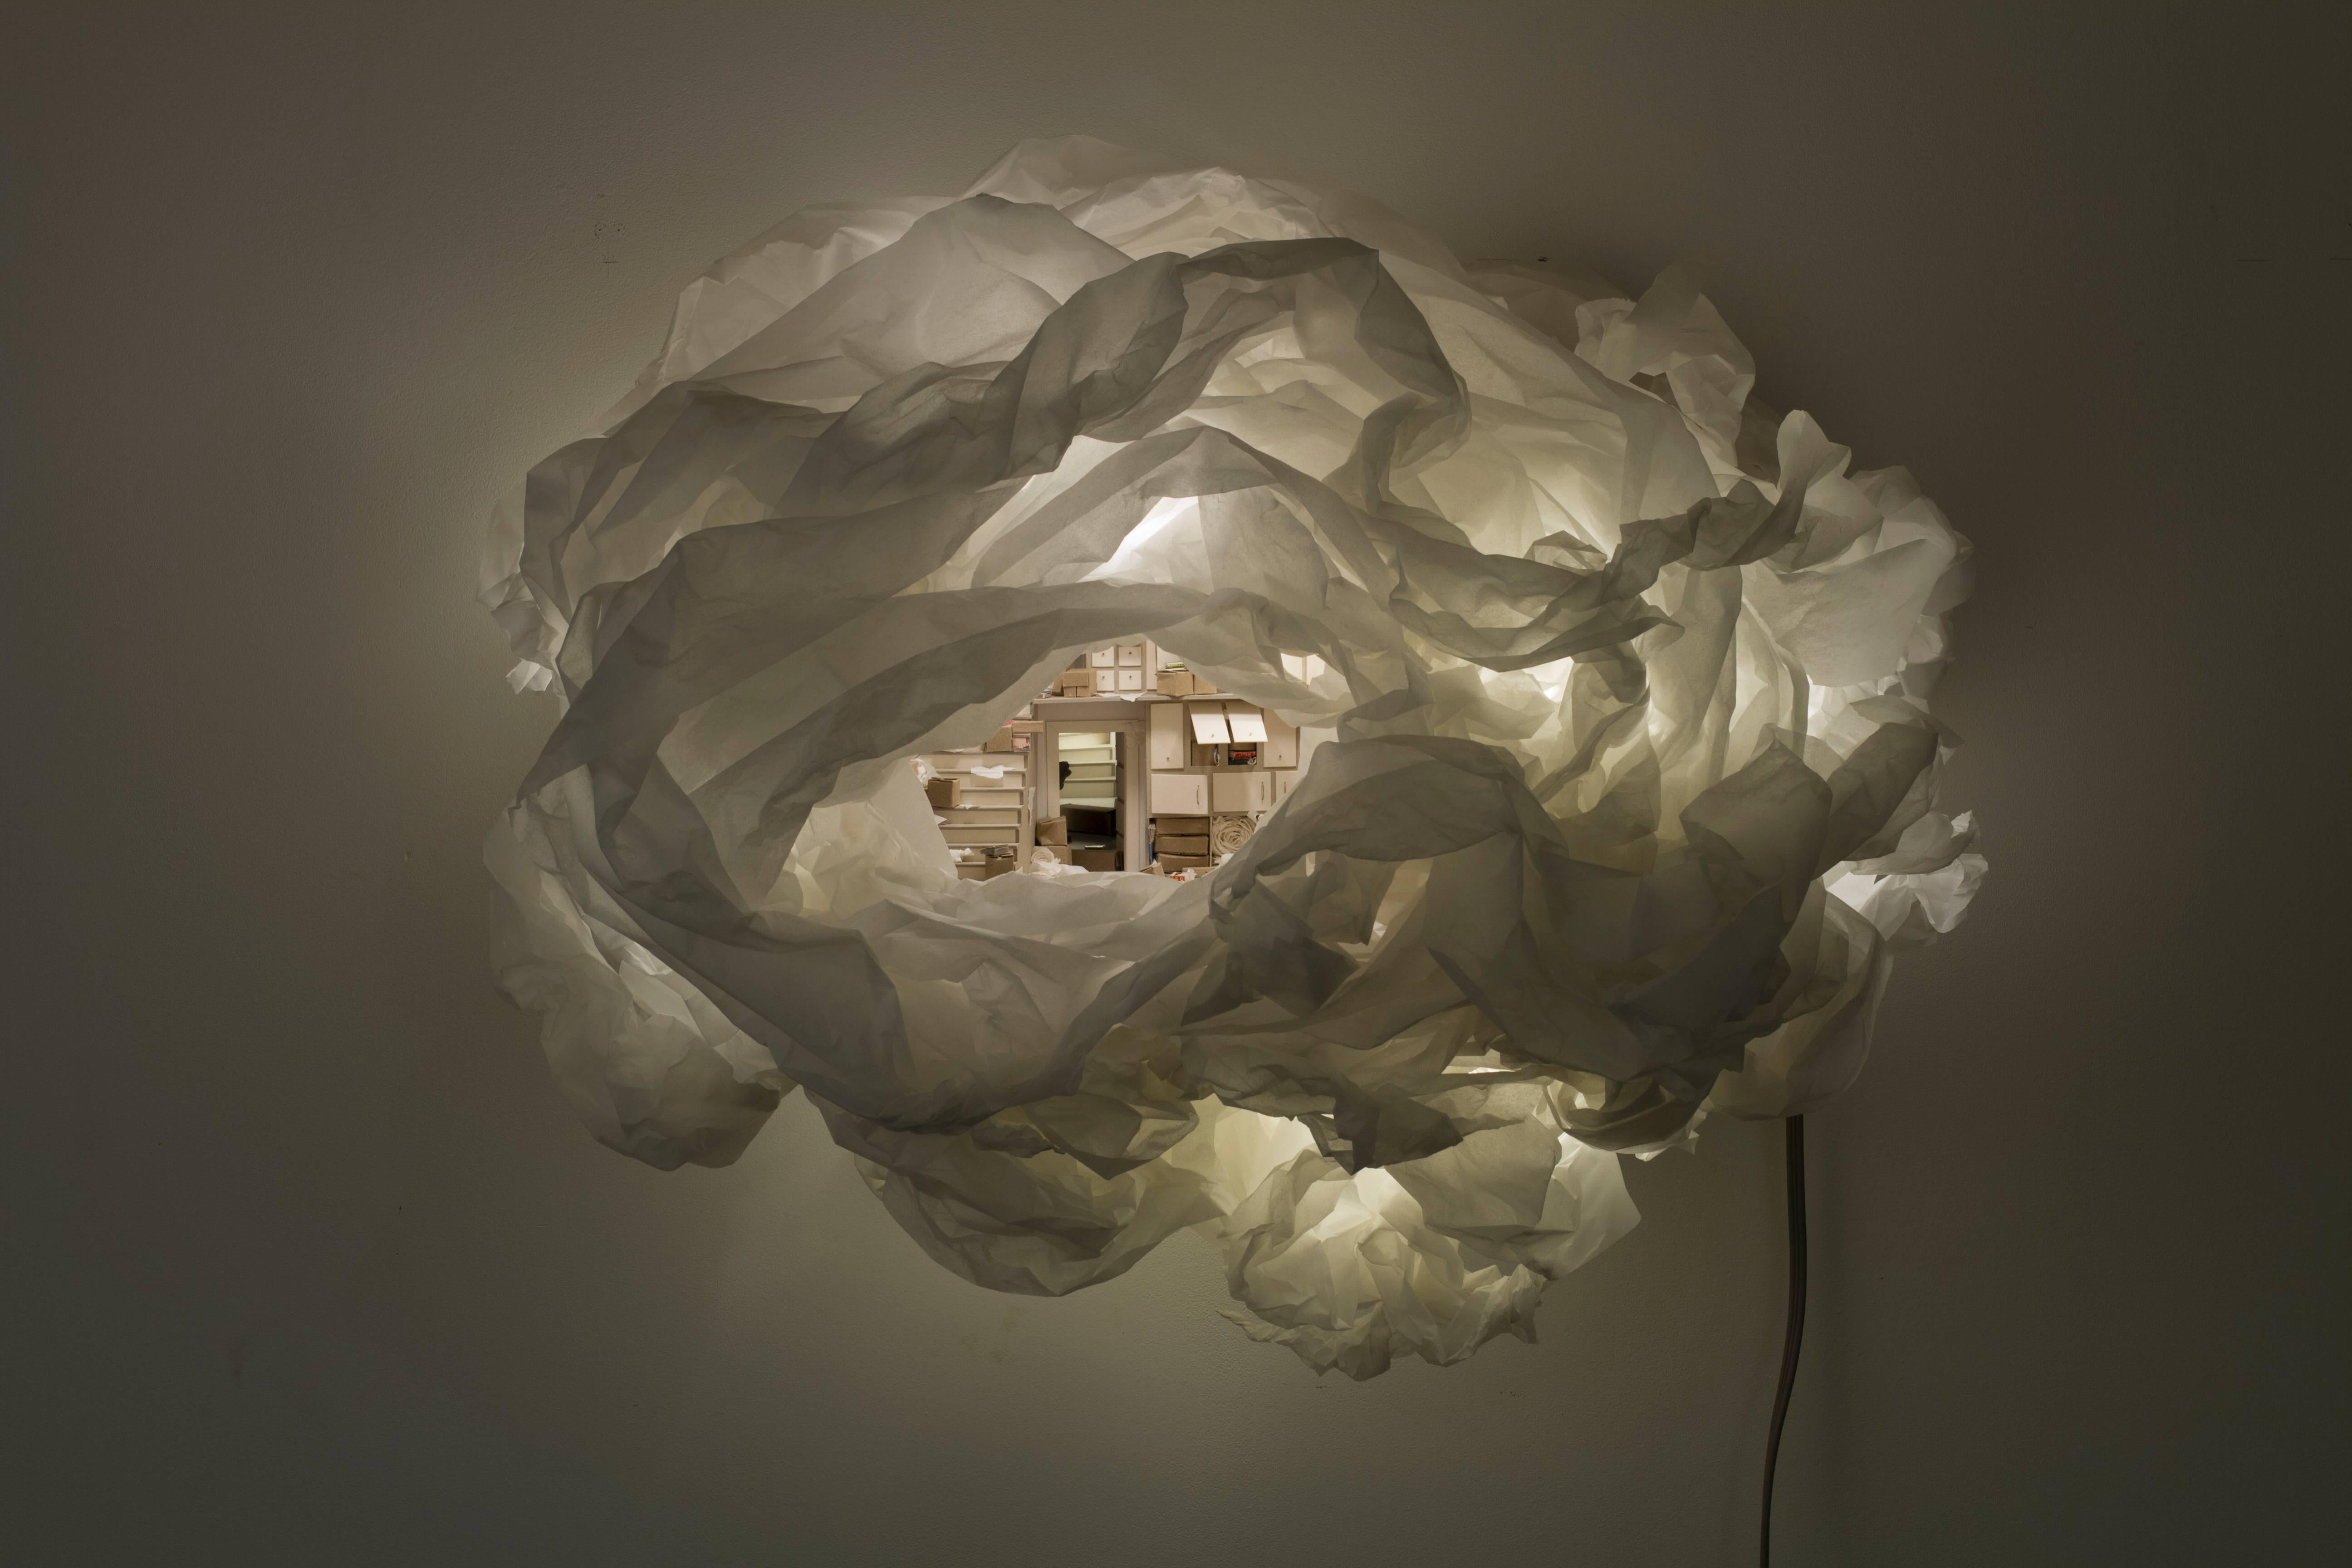 Untitled from the Ephemeral Mind series - Sculpture by Erika Dueck